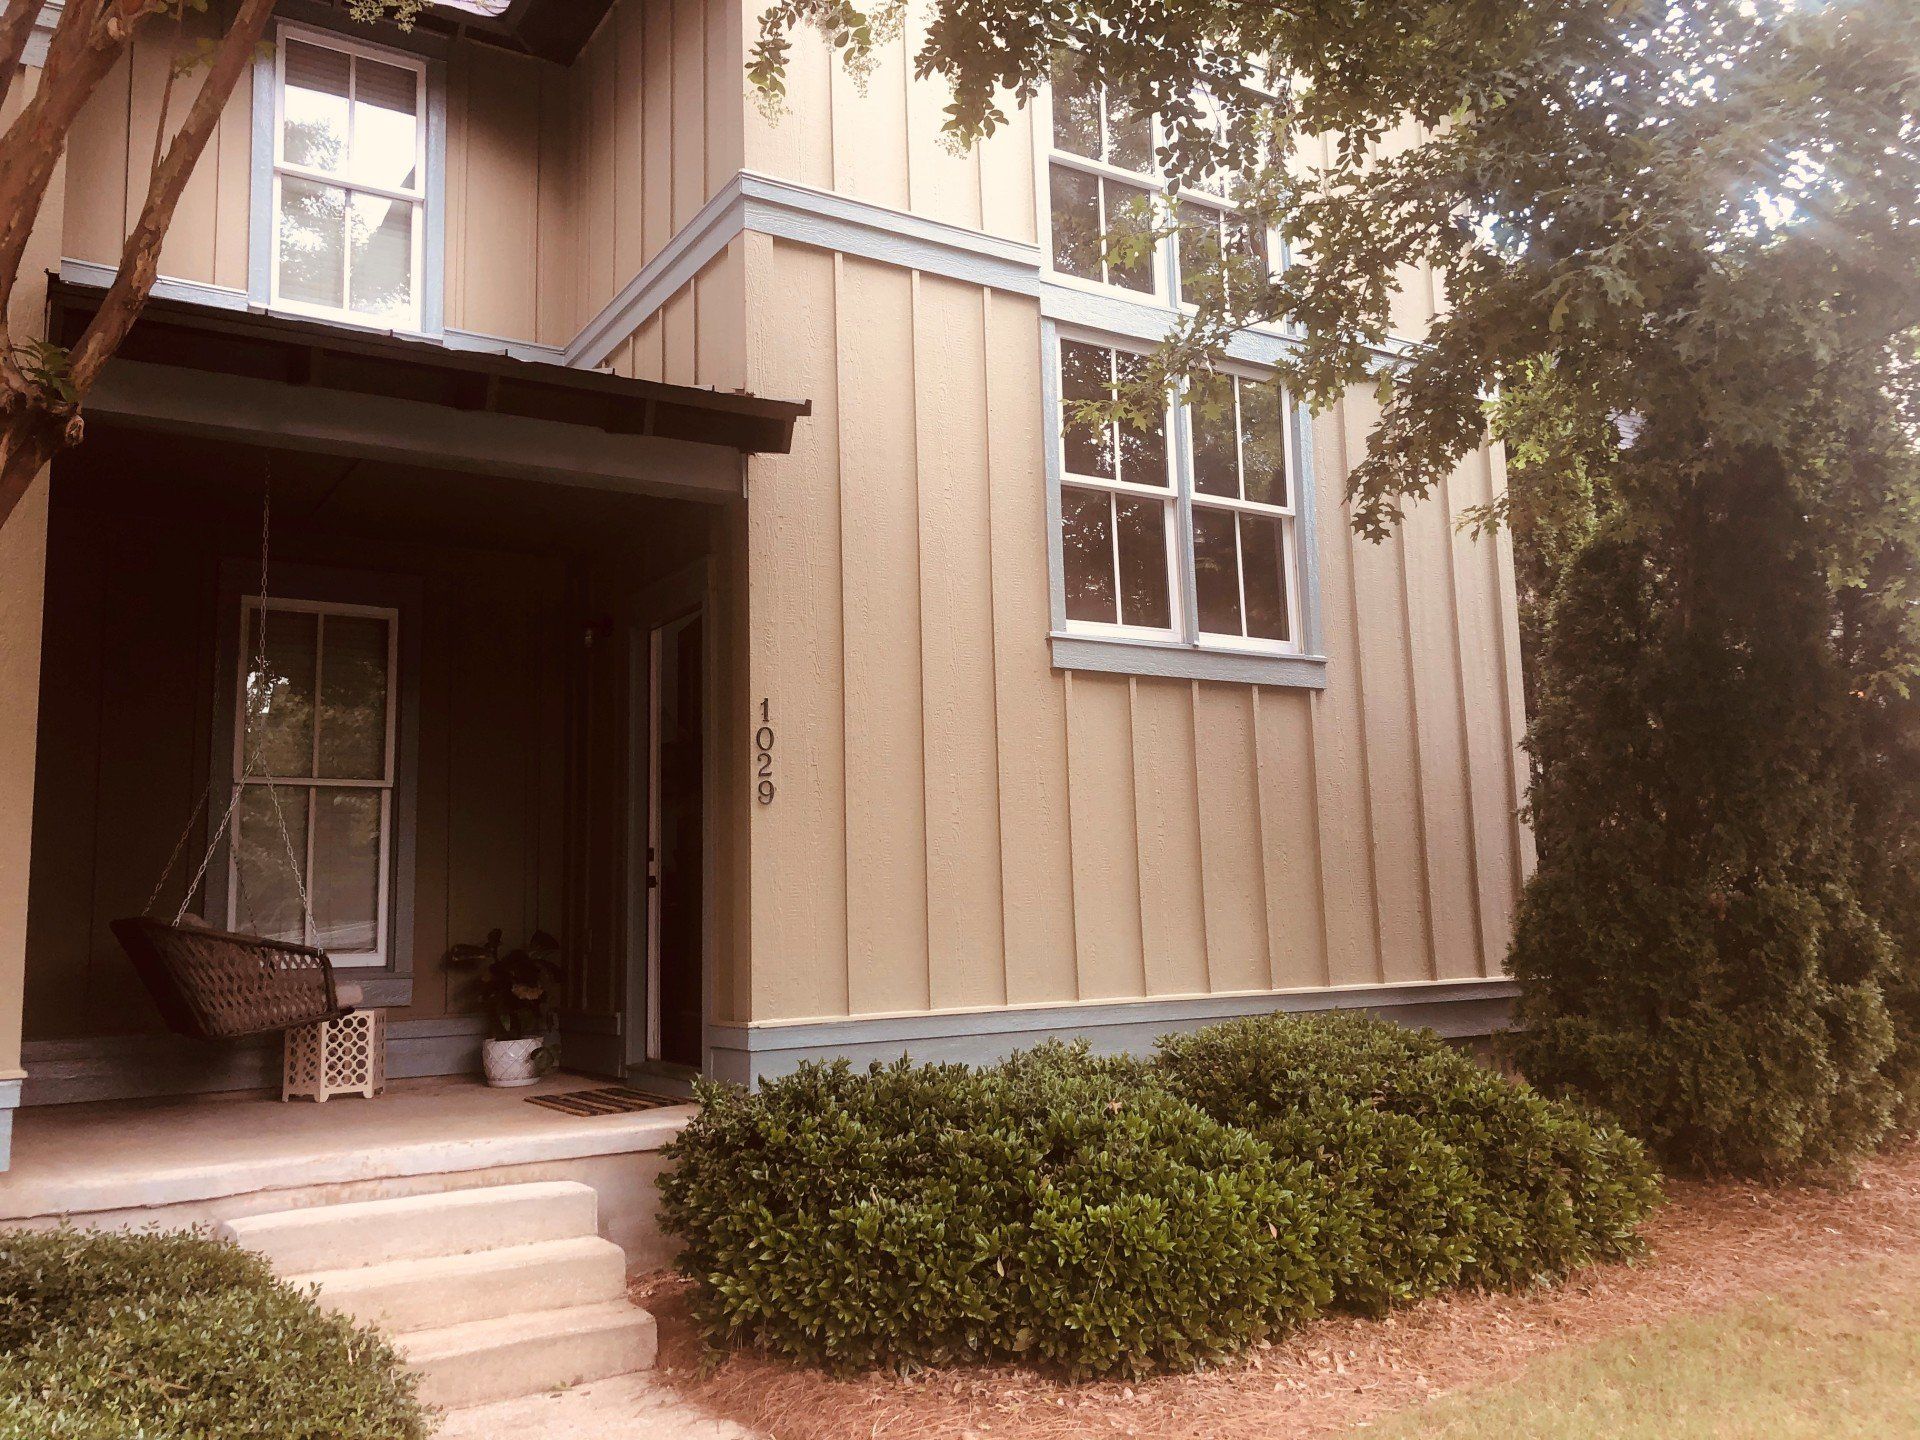 SPF Home Tint in Auburn, AL - Now the perfect amount of lighting comes inside without the scorching heat & UV Radiation after spf home tint in Auburn, AL